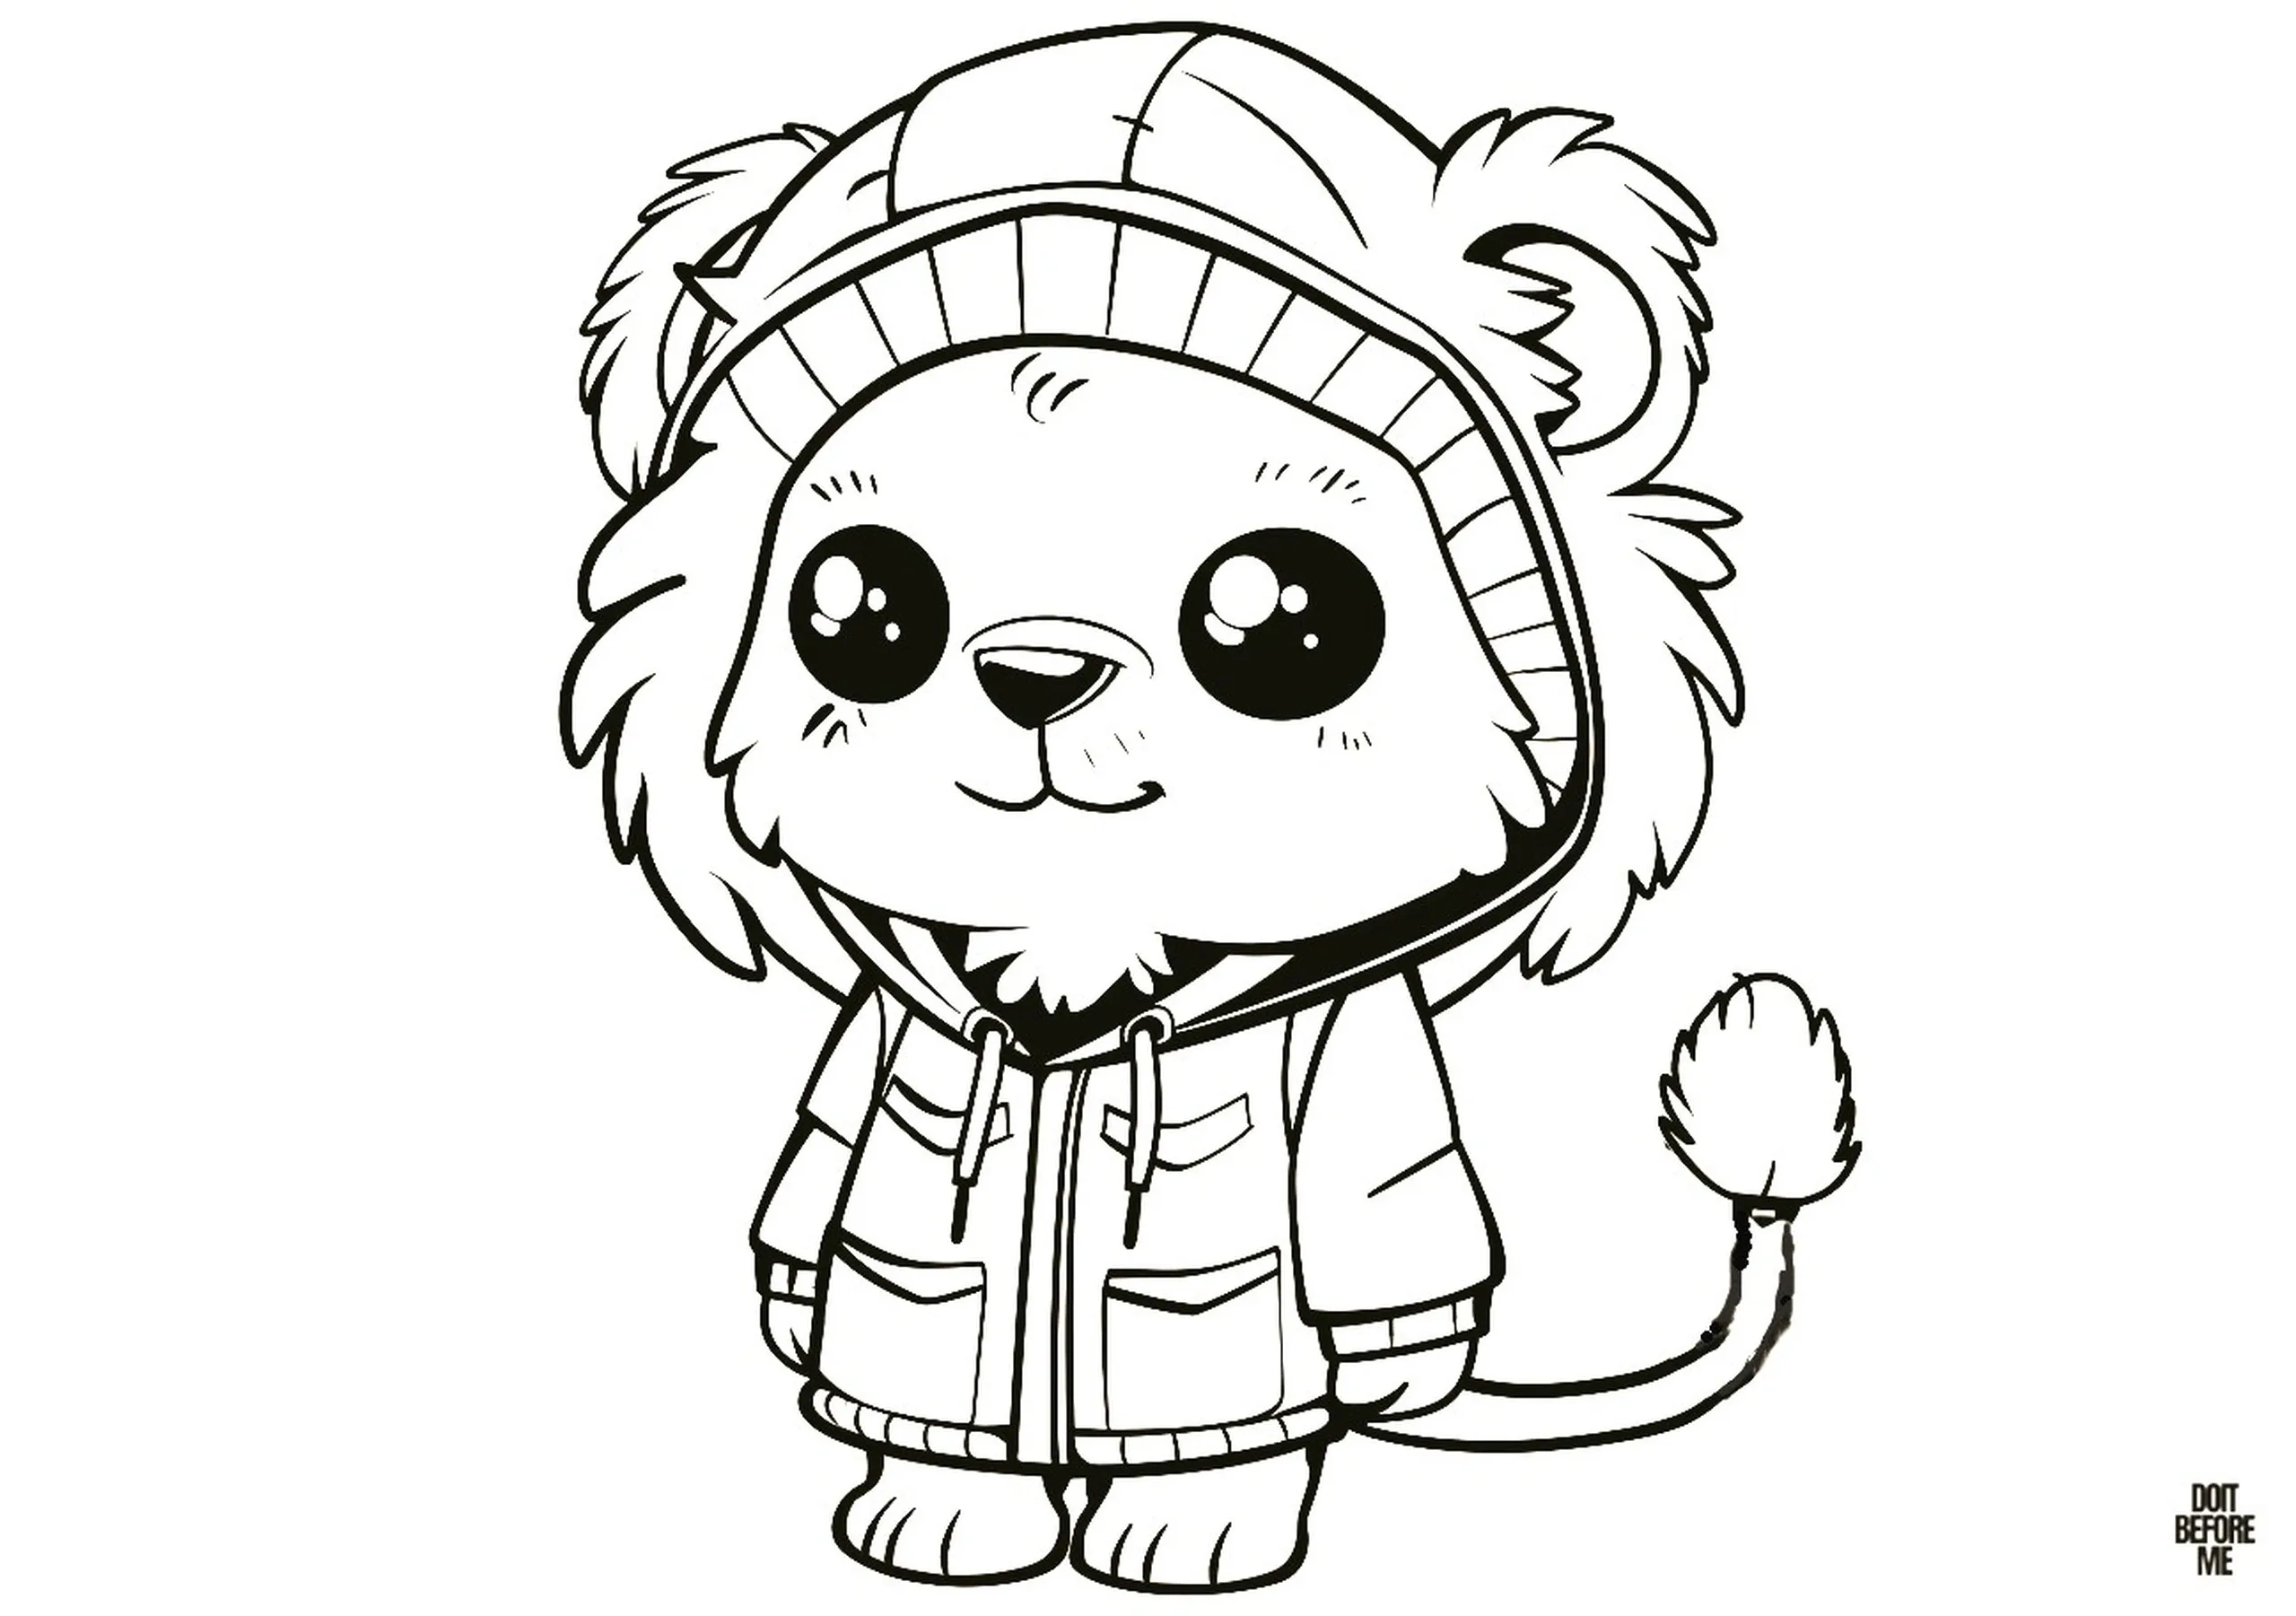 Printable coloring page for children featuring a cute lion cub standing upright in clothing, portraying a lion character in a human-like pose.